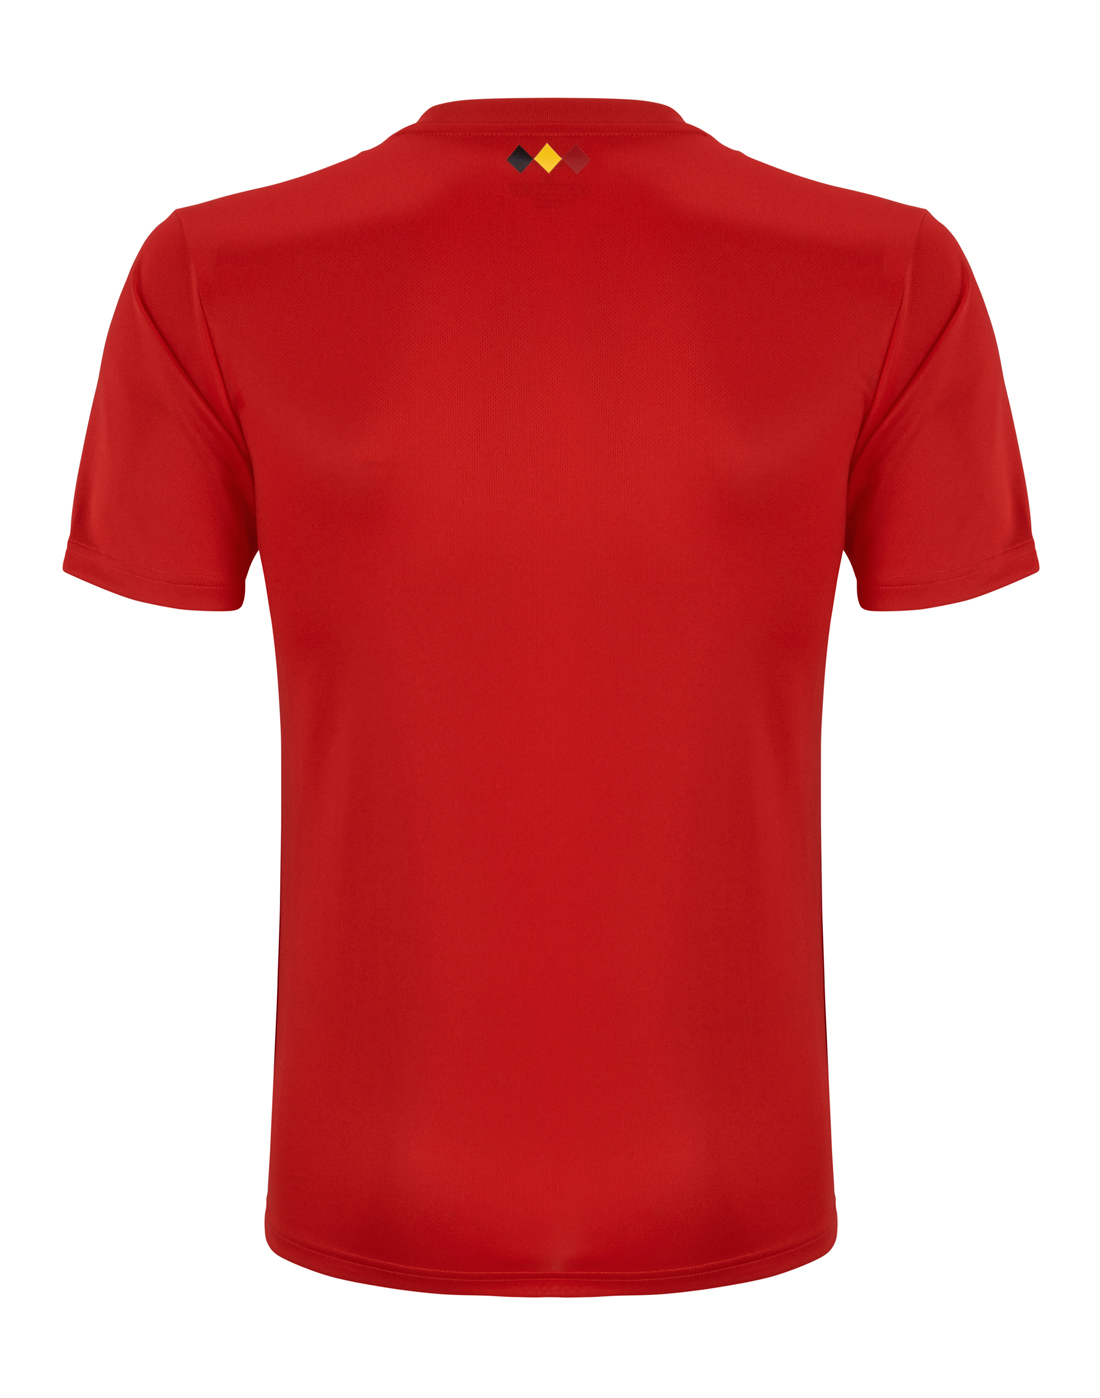 Adult Belgium World Cup 2018 Jersey | Life Style Sports